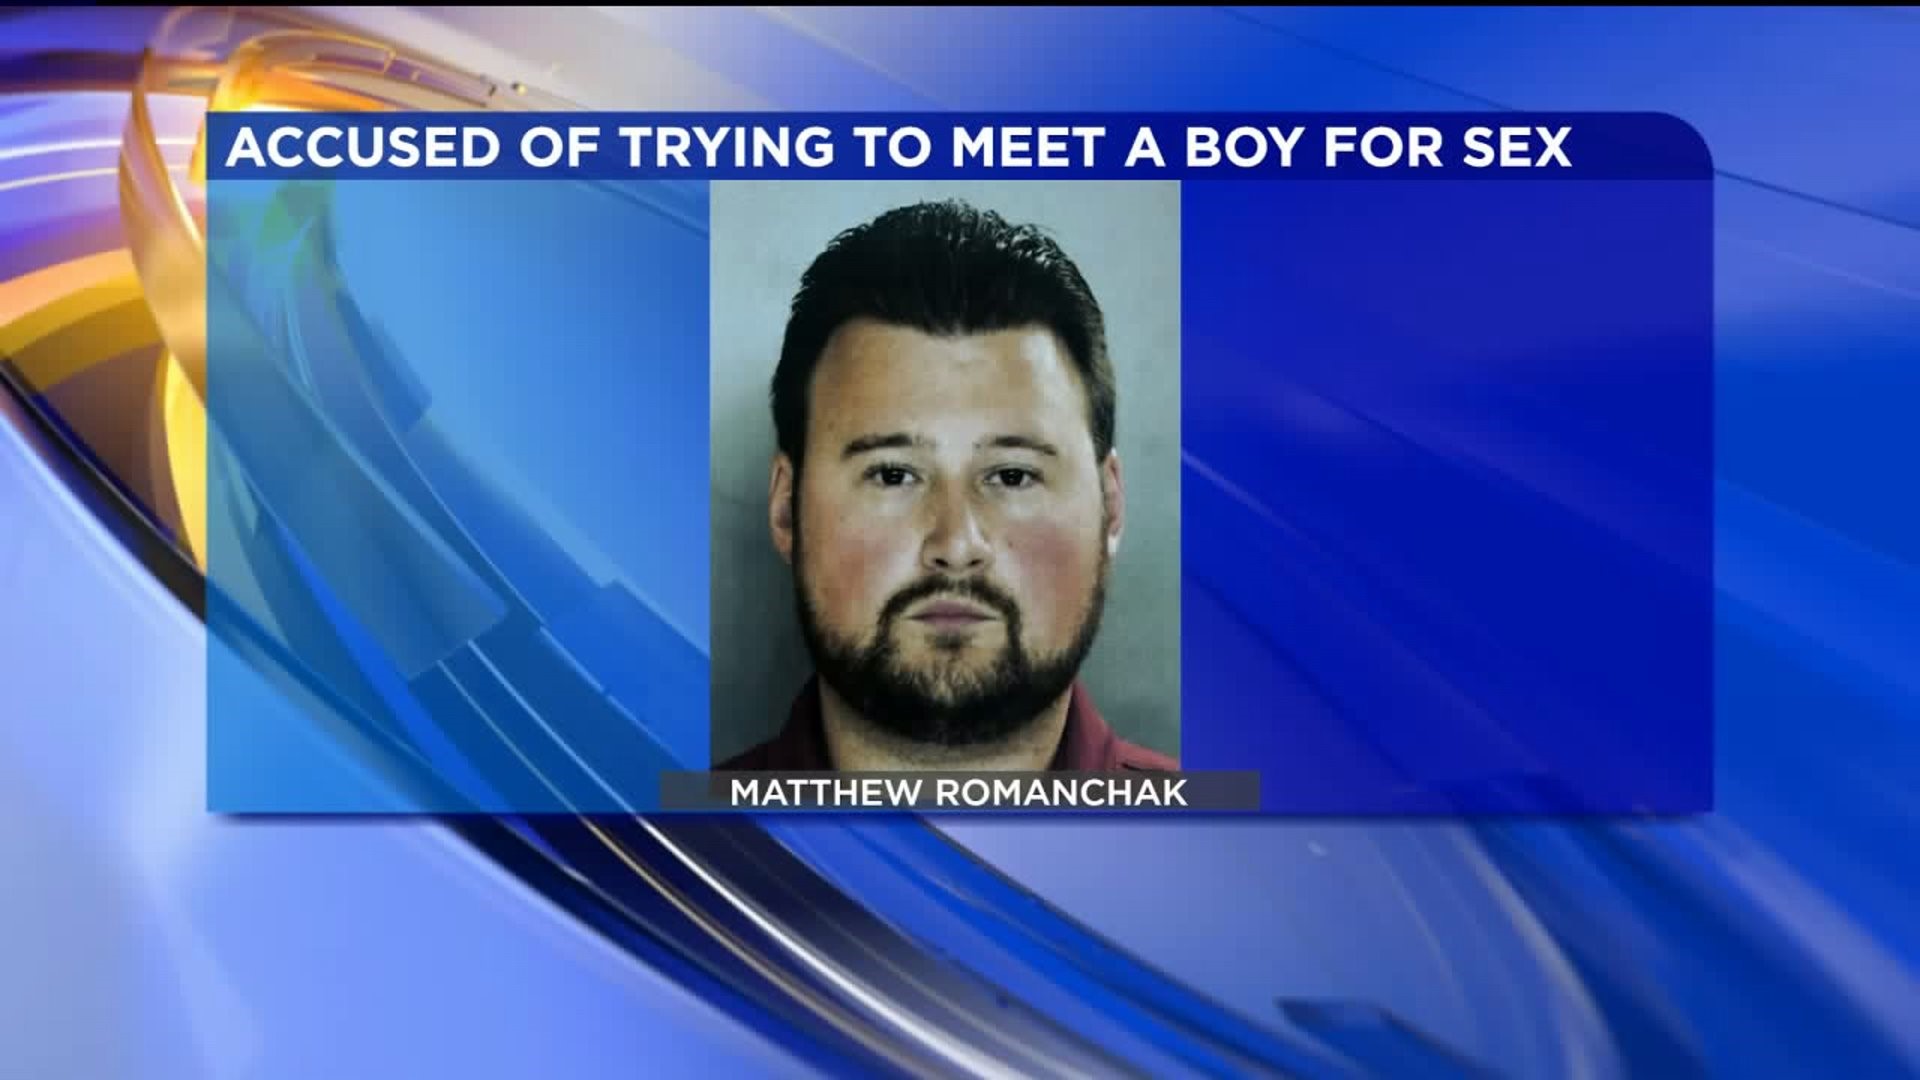 Police: Man Attempts to Meet Underage Boy for Sex, Instead is Greeted by Officers